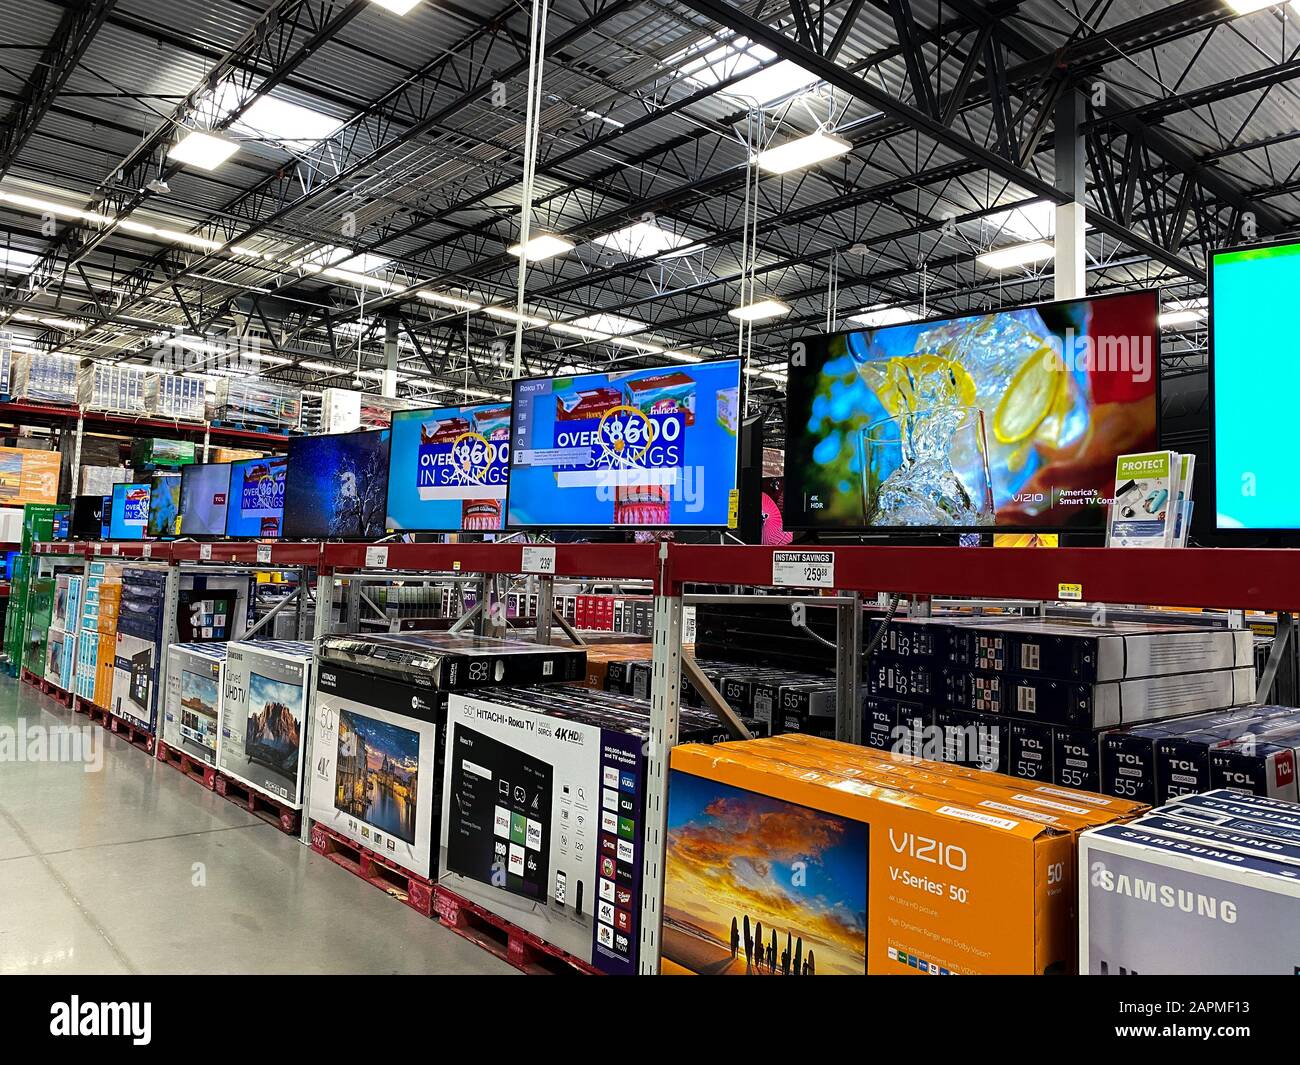 Orlando,FL/USA -1/23/20: The TV aisle of a Sams Club Wholesale retail store  with a variety of television ready to be purchased by consumers Stock Photo  - Alamy